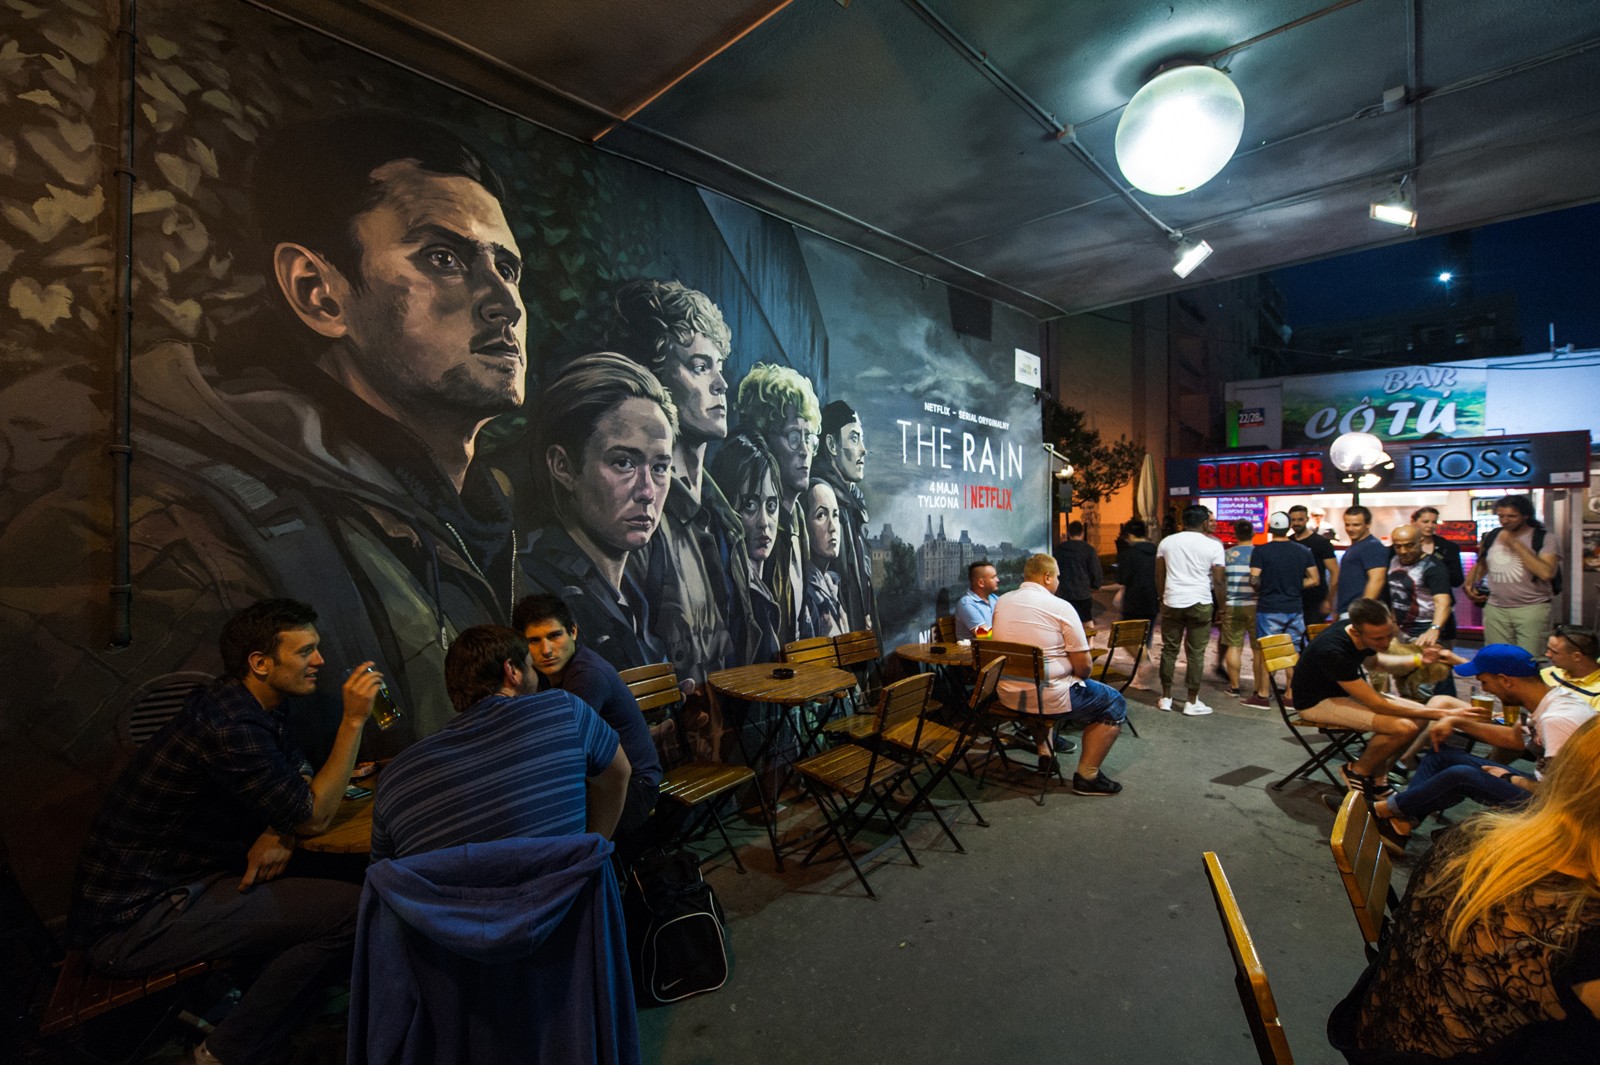 Passage on Pavilions with a wall painting commissioned by Netflix | The Rain  | Portfolio